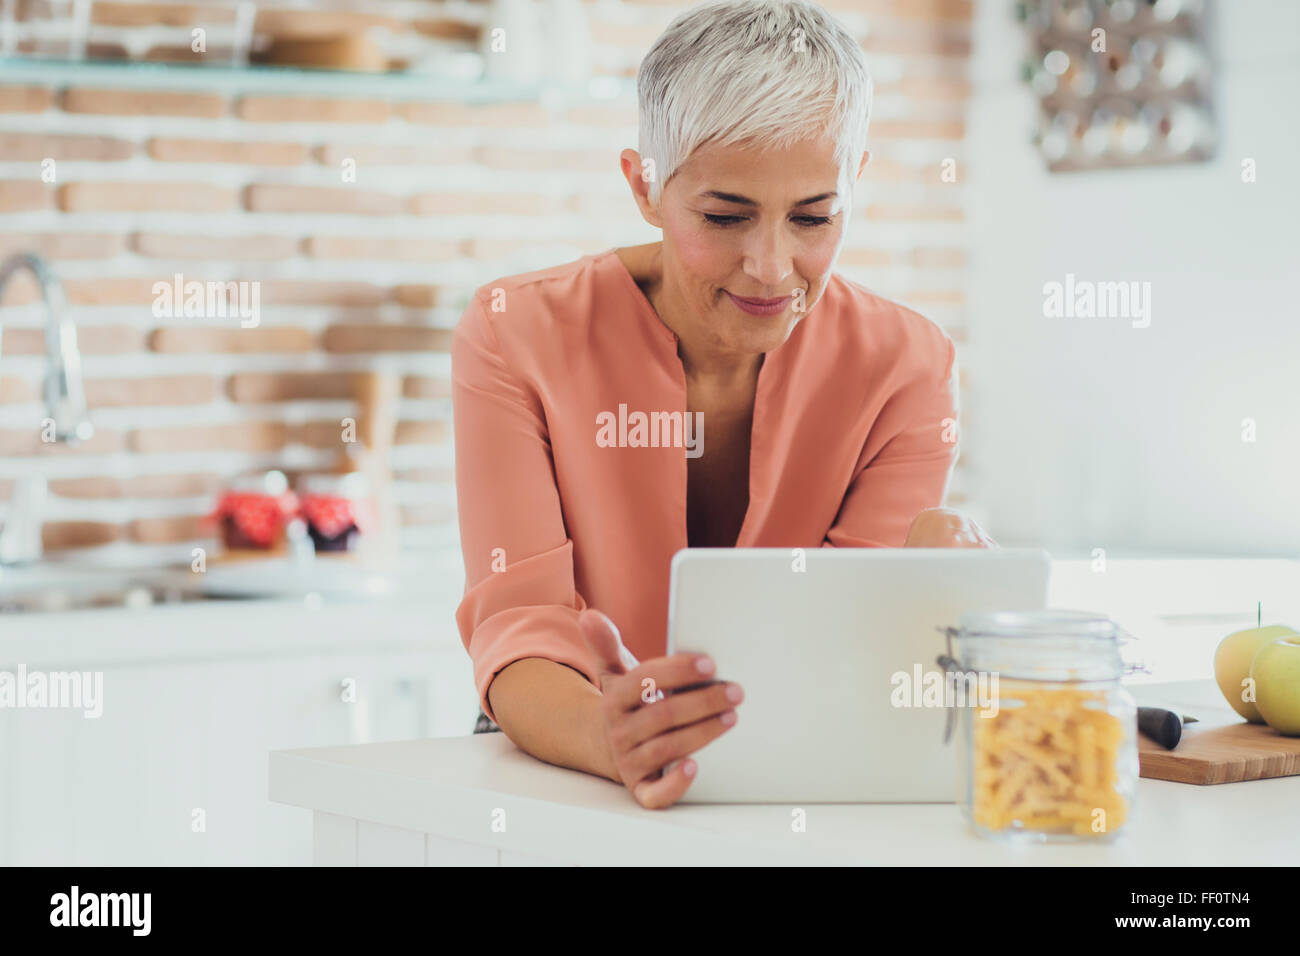 Older Caucasian woman using digital tablet in kitchen Banque D'Images